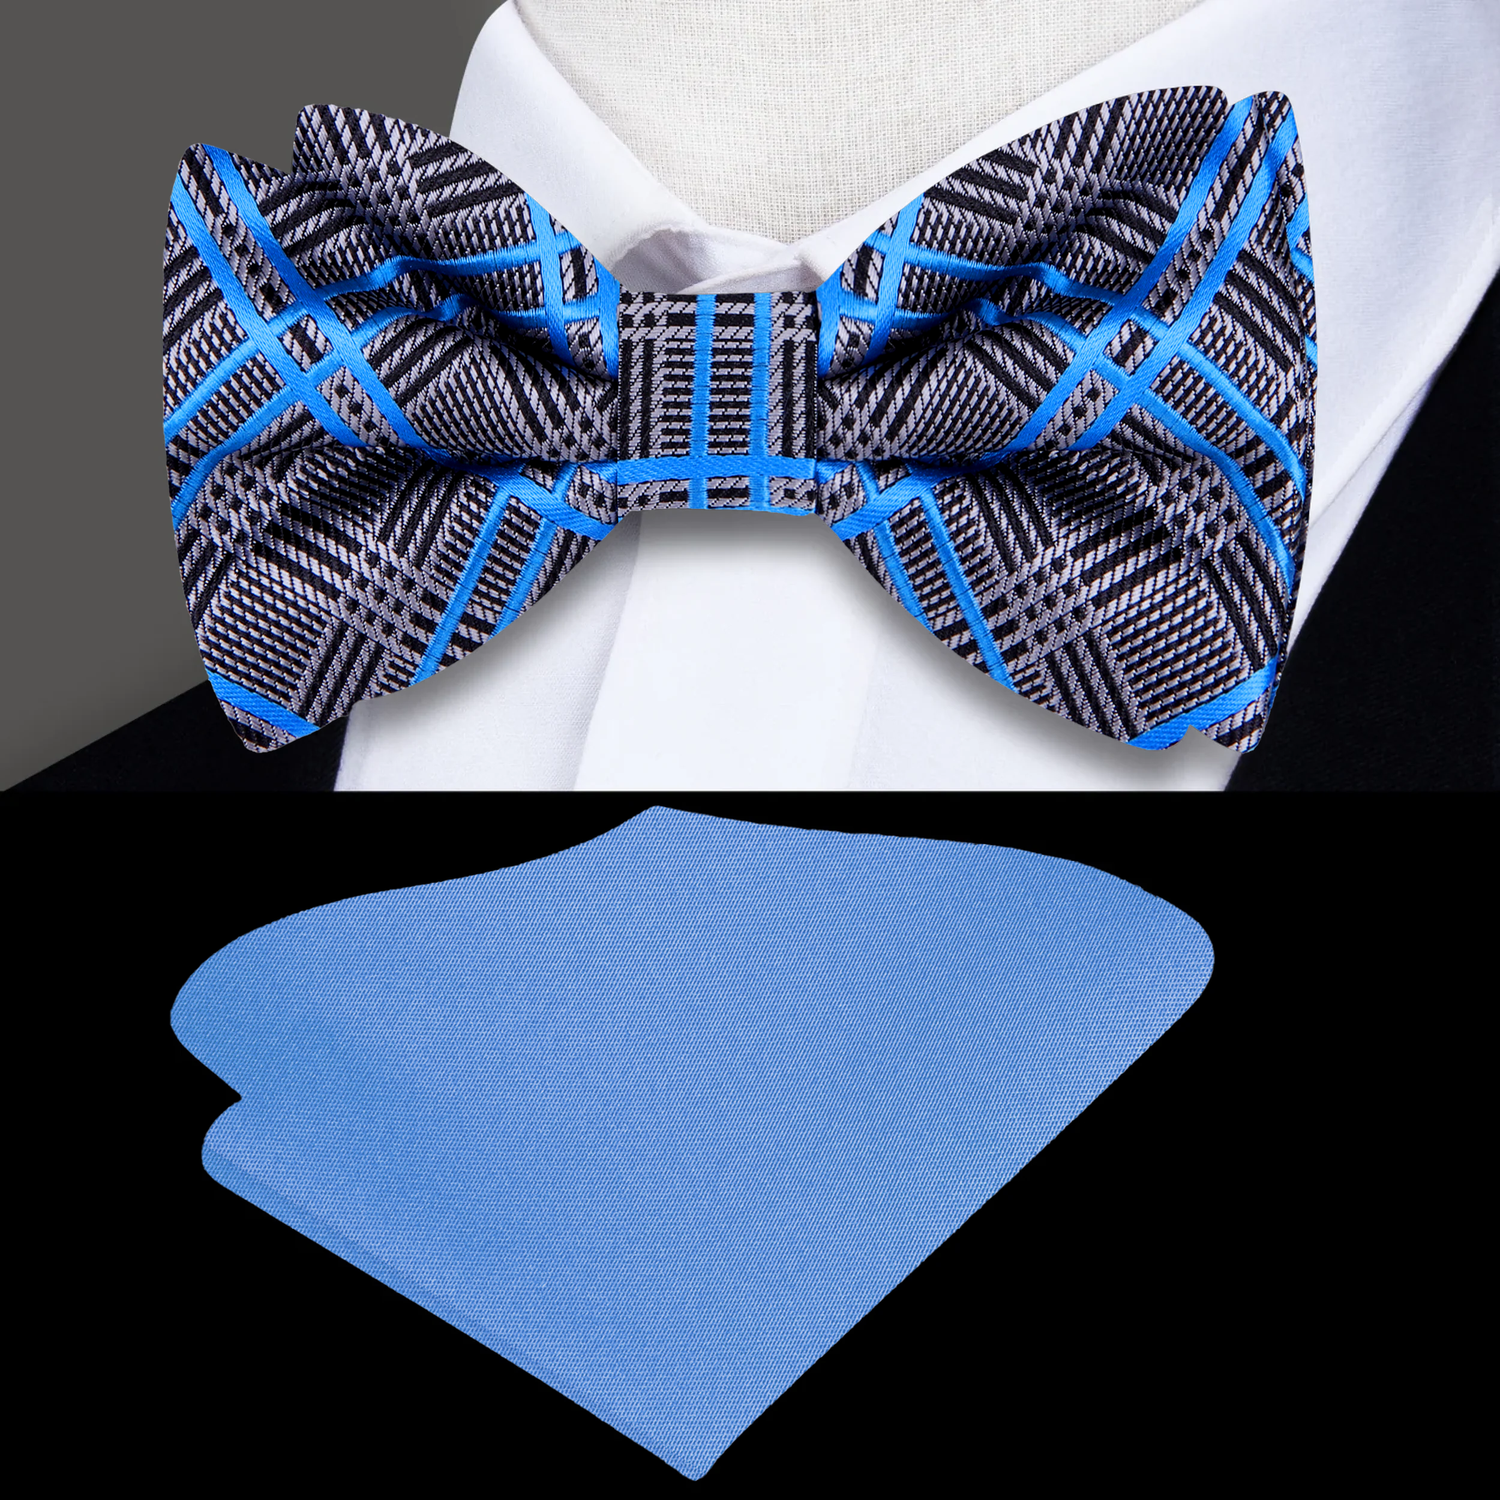 ||Grey, Blue Plaid Bow Tie And Blue Square